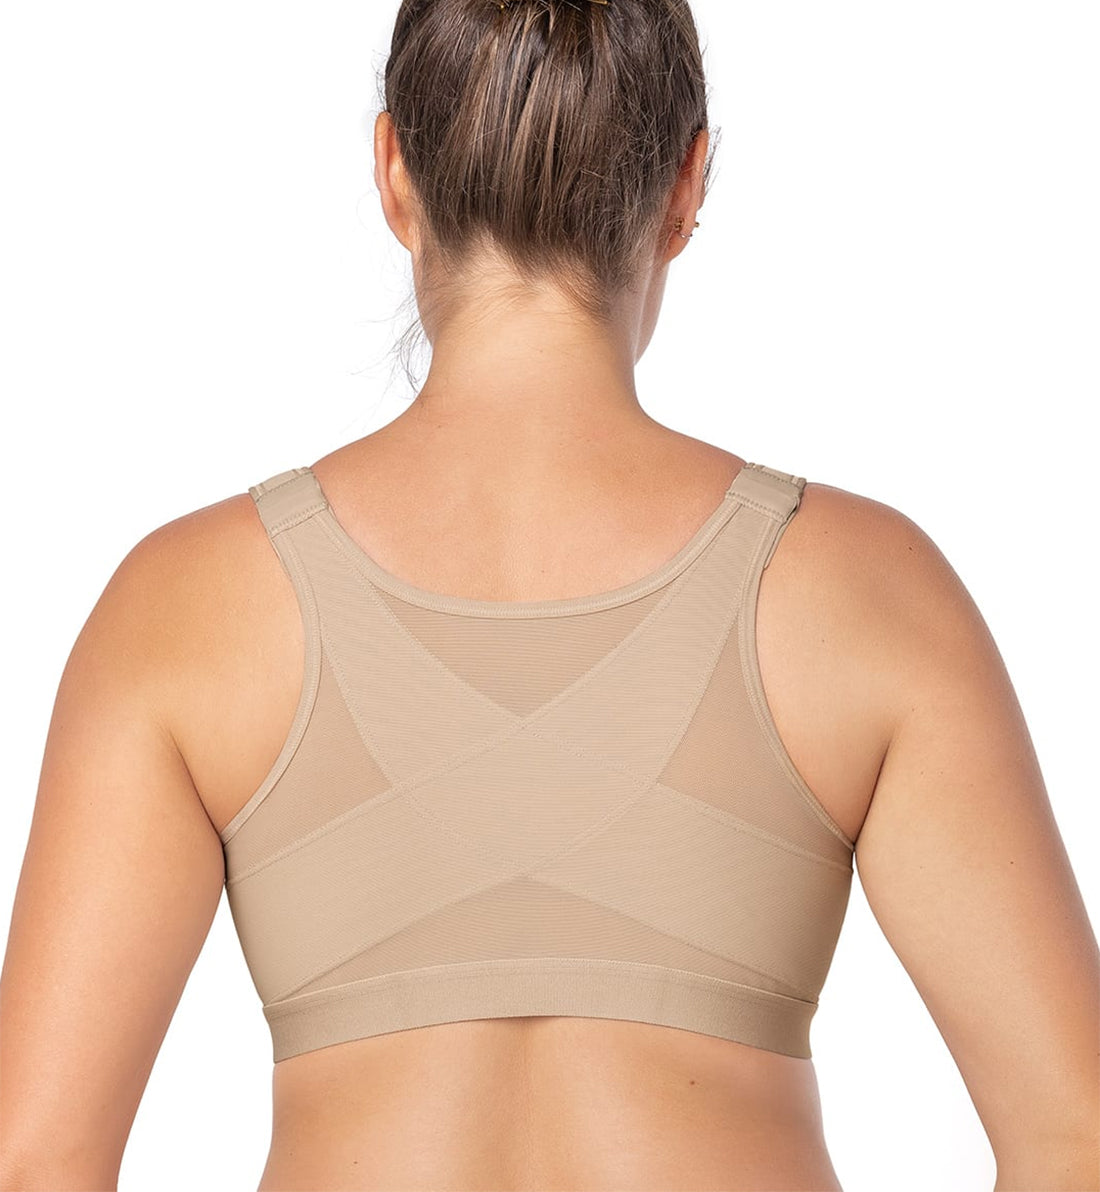 Leonisa Molded Post Surgery and Posture Corrector Bra (011473)- Nude -  Breakout Bras